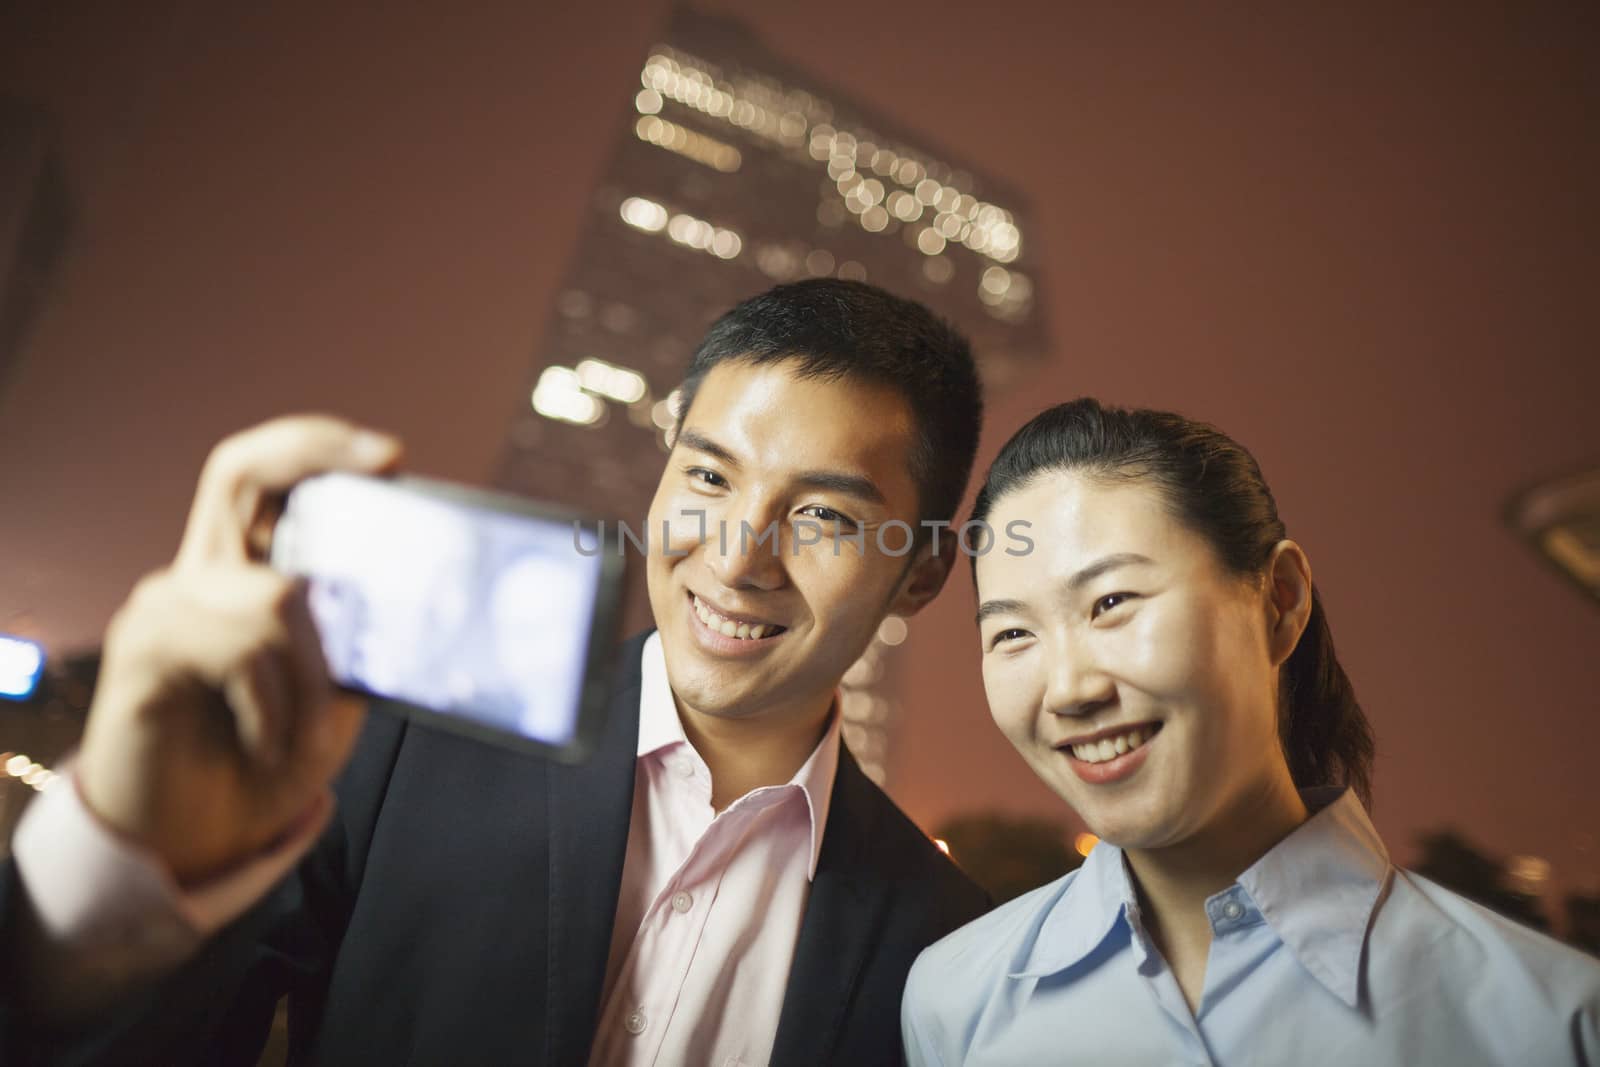 two business people smiling and taking a picture with the phone